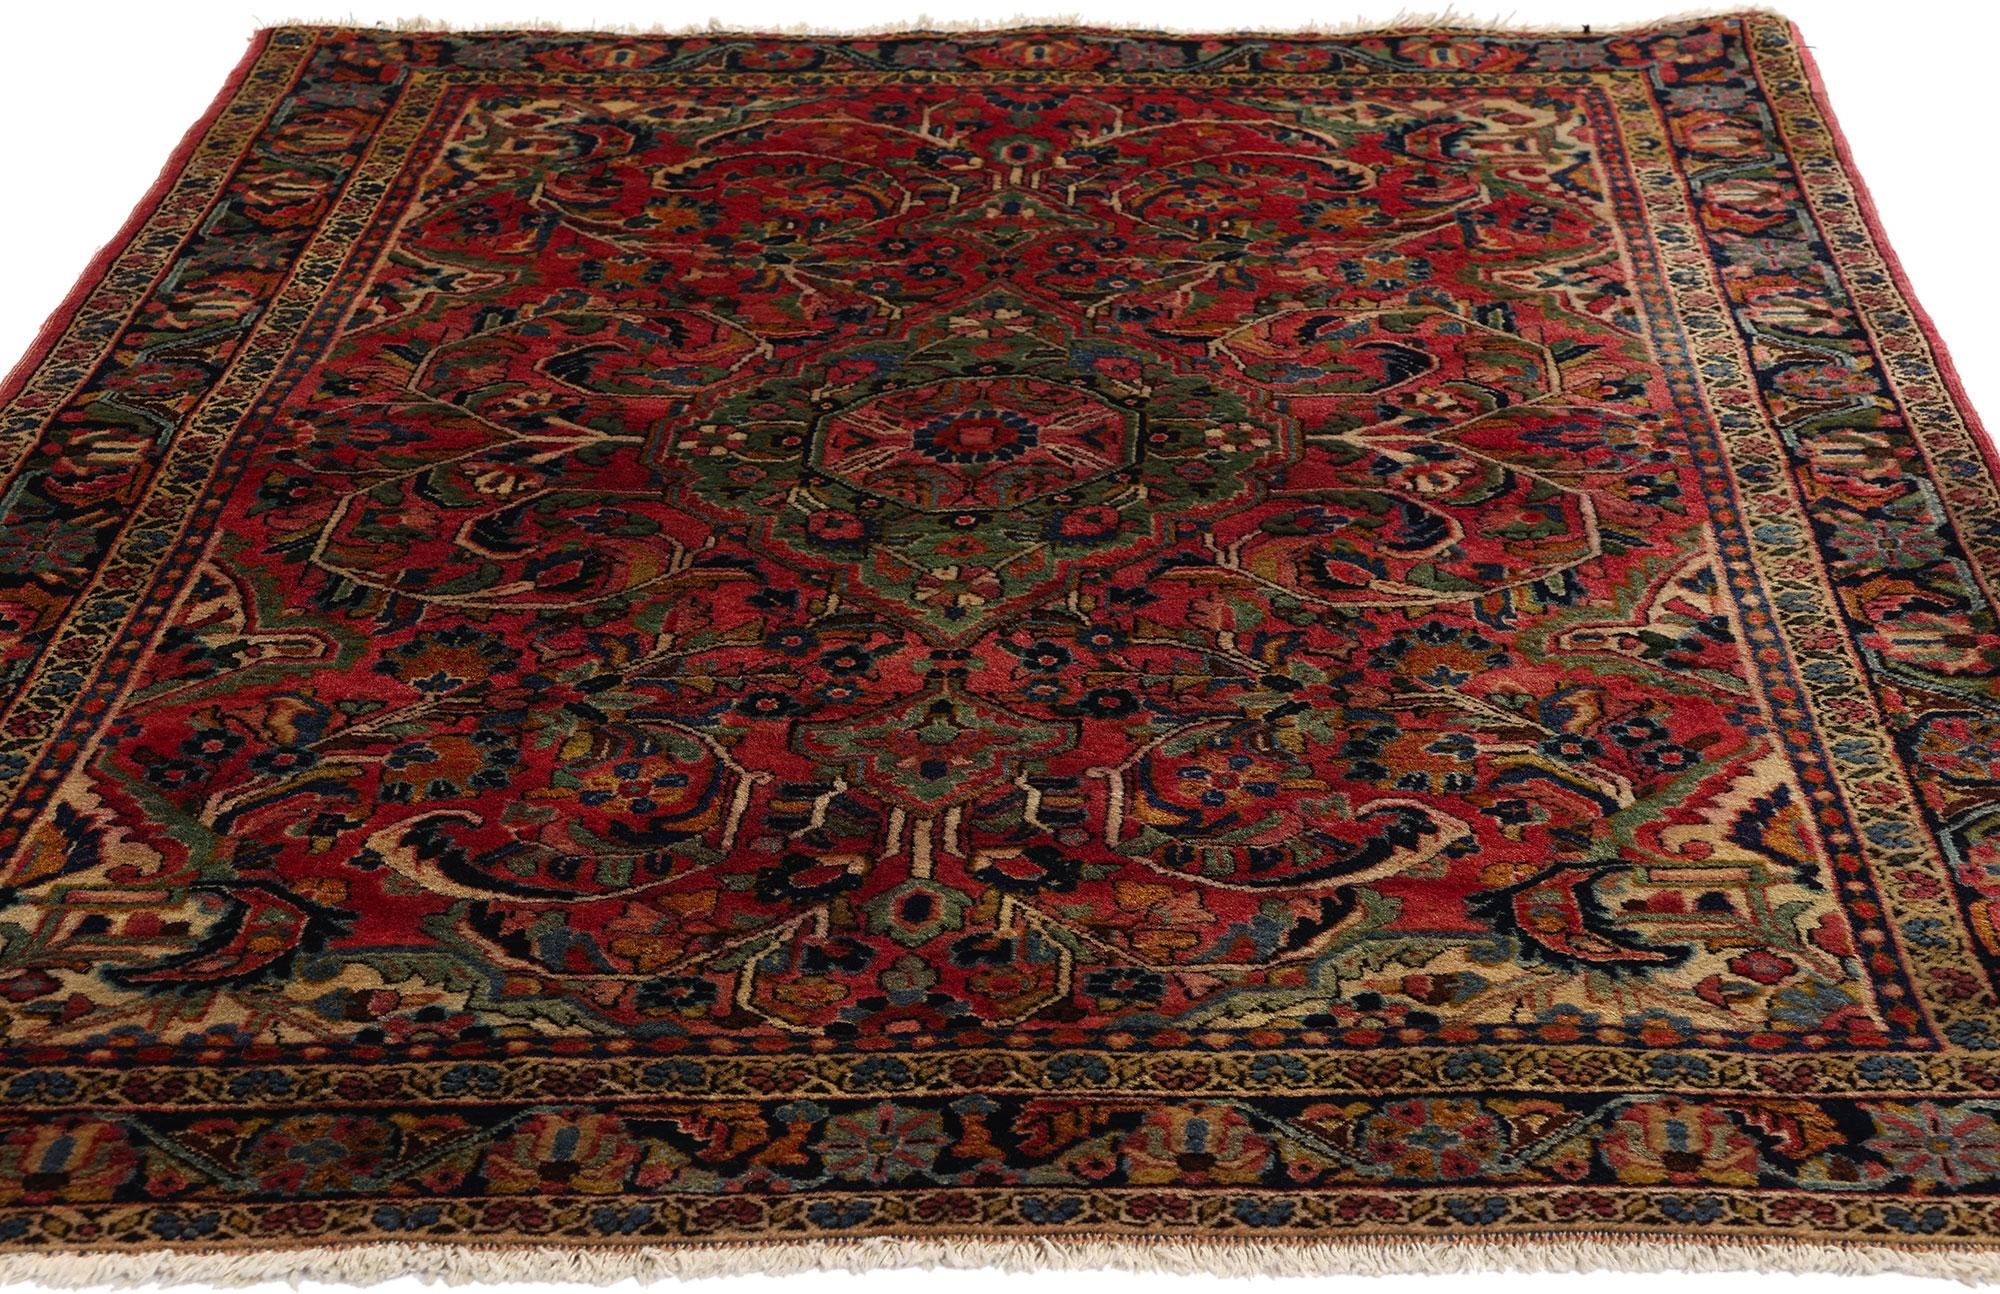 Victorian 1920s Antique Red Persian Farahan Sarouk Wool Rug with Timeless Elegance For Sale